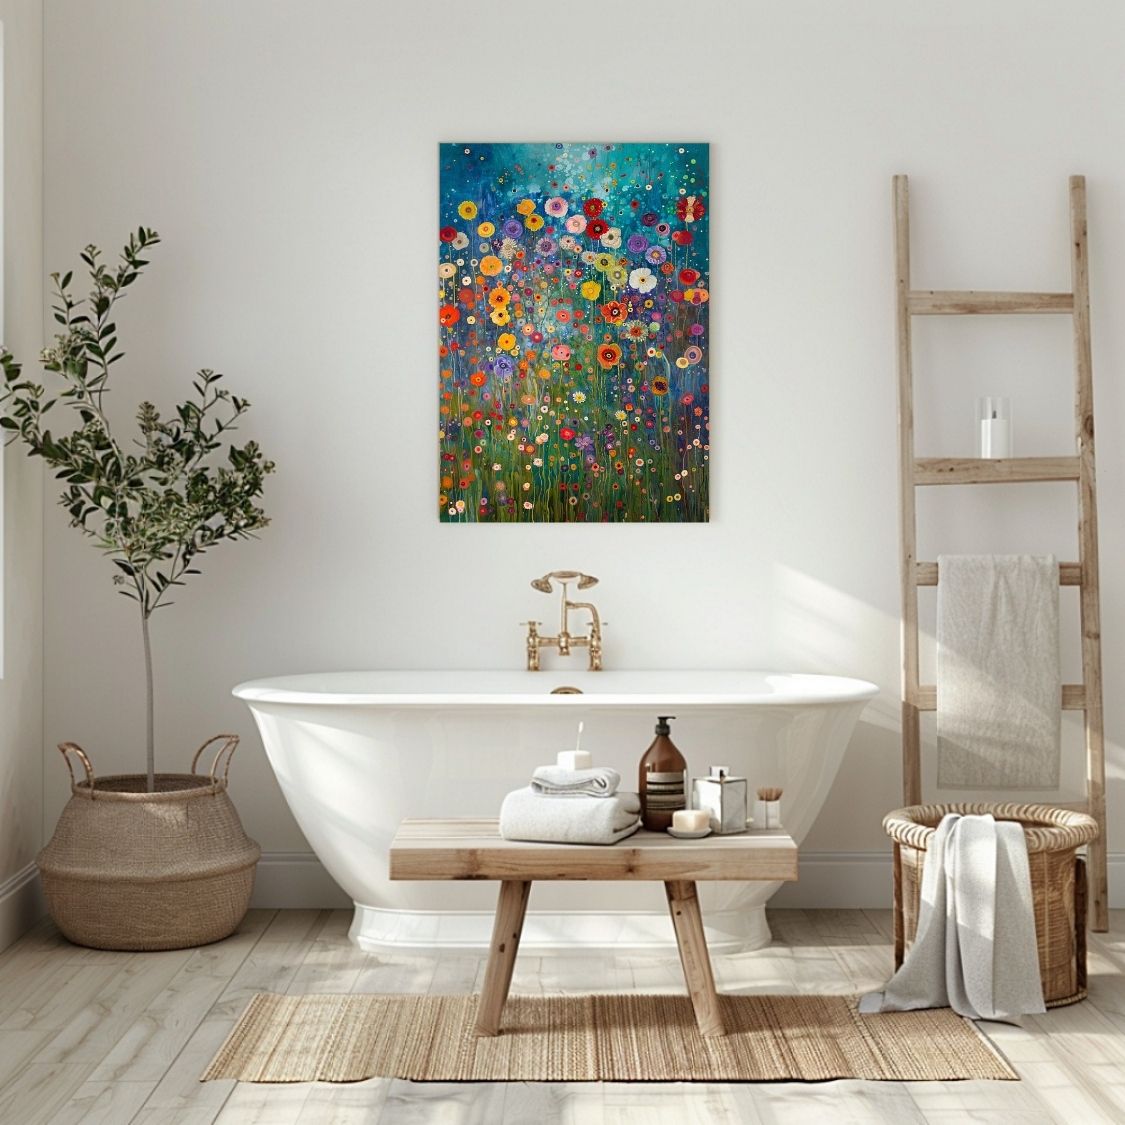 Canvas print wall art showing 'Natures Song - Wildflowers with a Soft Abstract Touch' in a bathroom